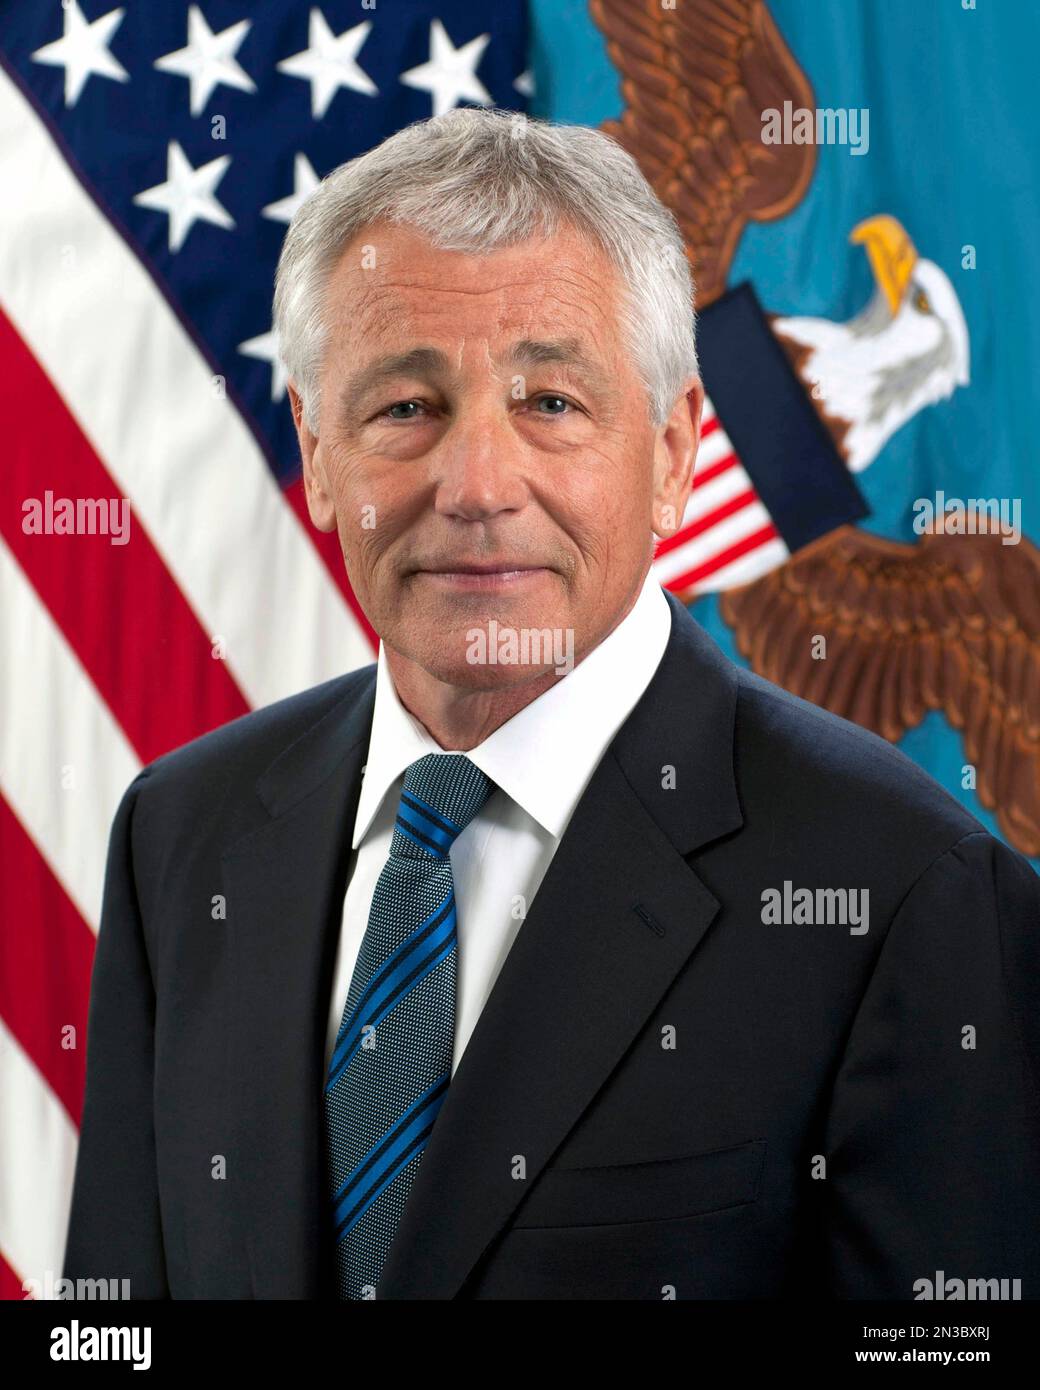 Charles Timothy Hagel, Secretary of Defense Chuck Hagel.  DoD photo by Monica King, U.S. Army. Charles Timothy Hagel, American military veteran and former politician who served as a United States senator from Nebraska from 1997 to 2009 and as the 24th United States secretary of defense from 2013 to 2015. Stock Photo